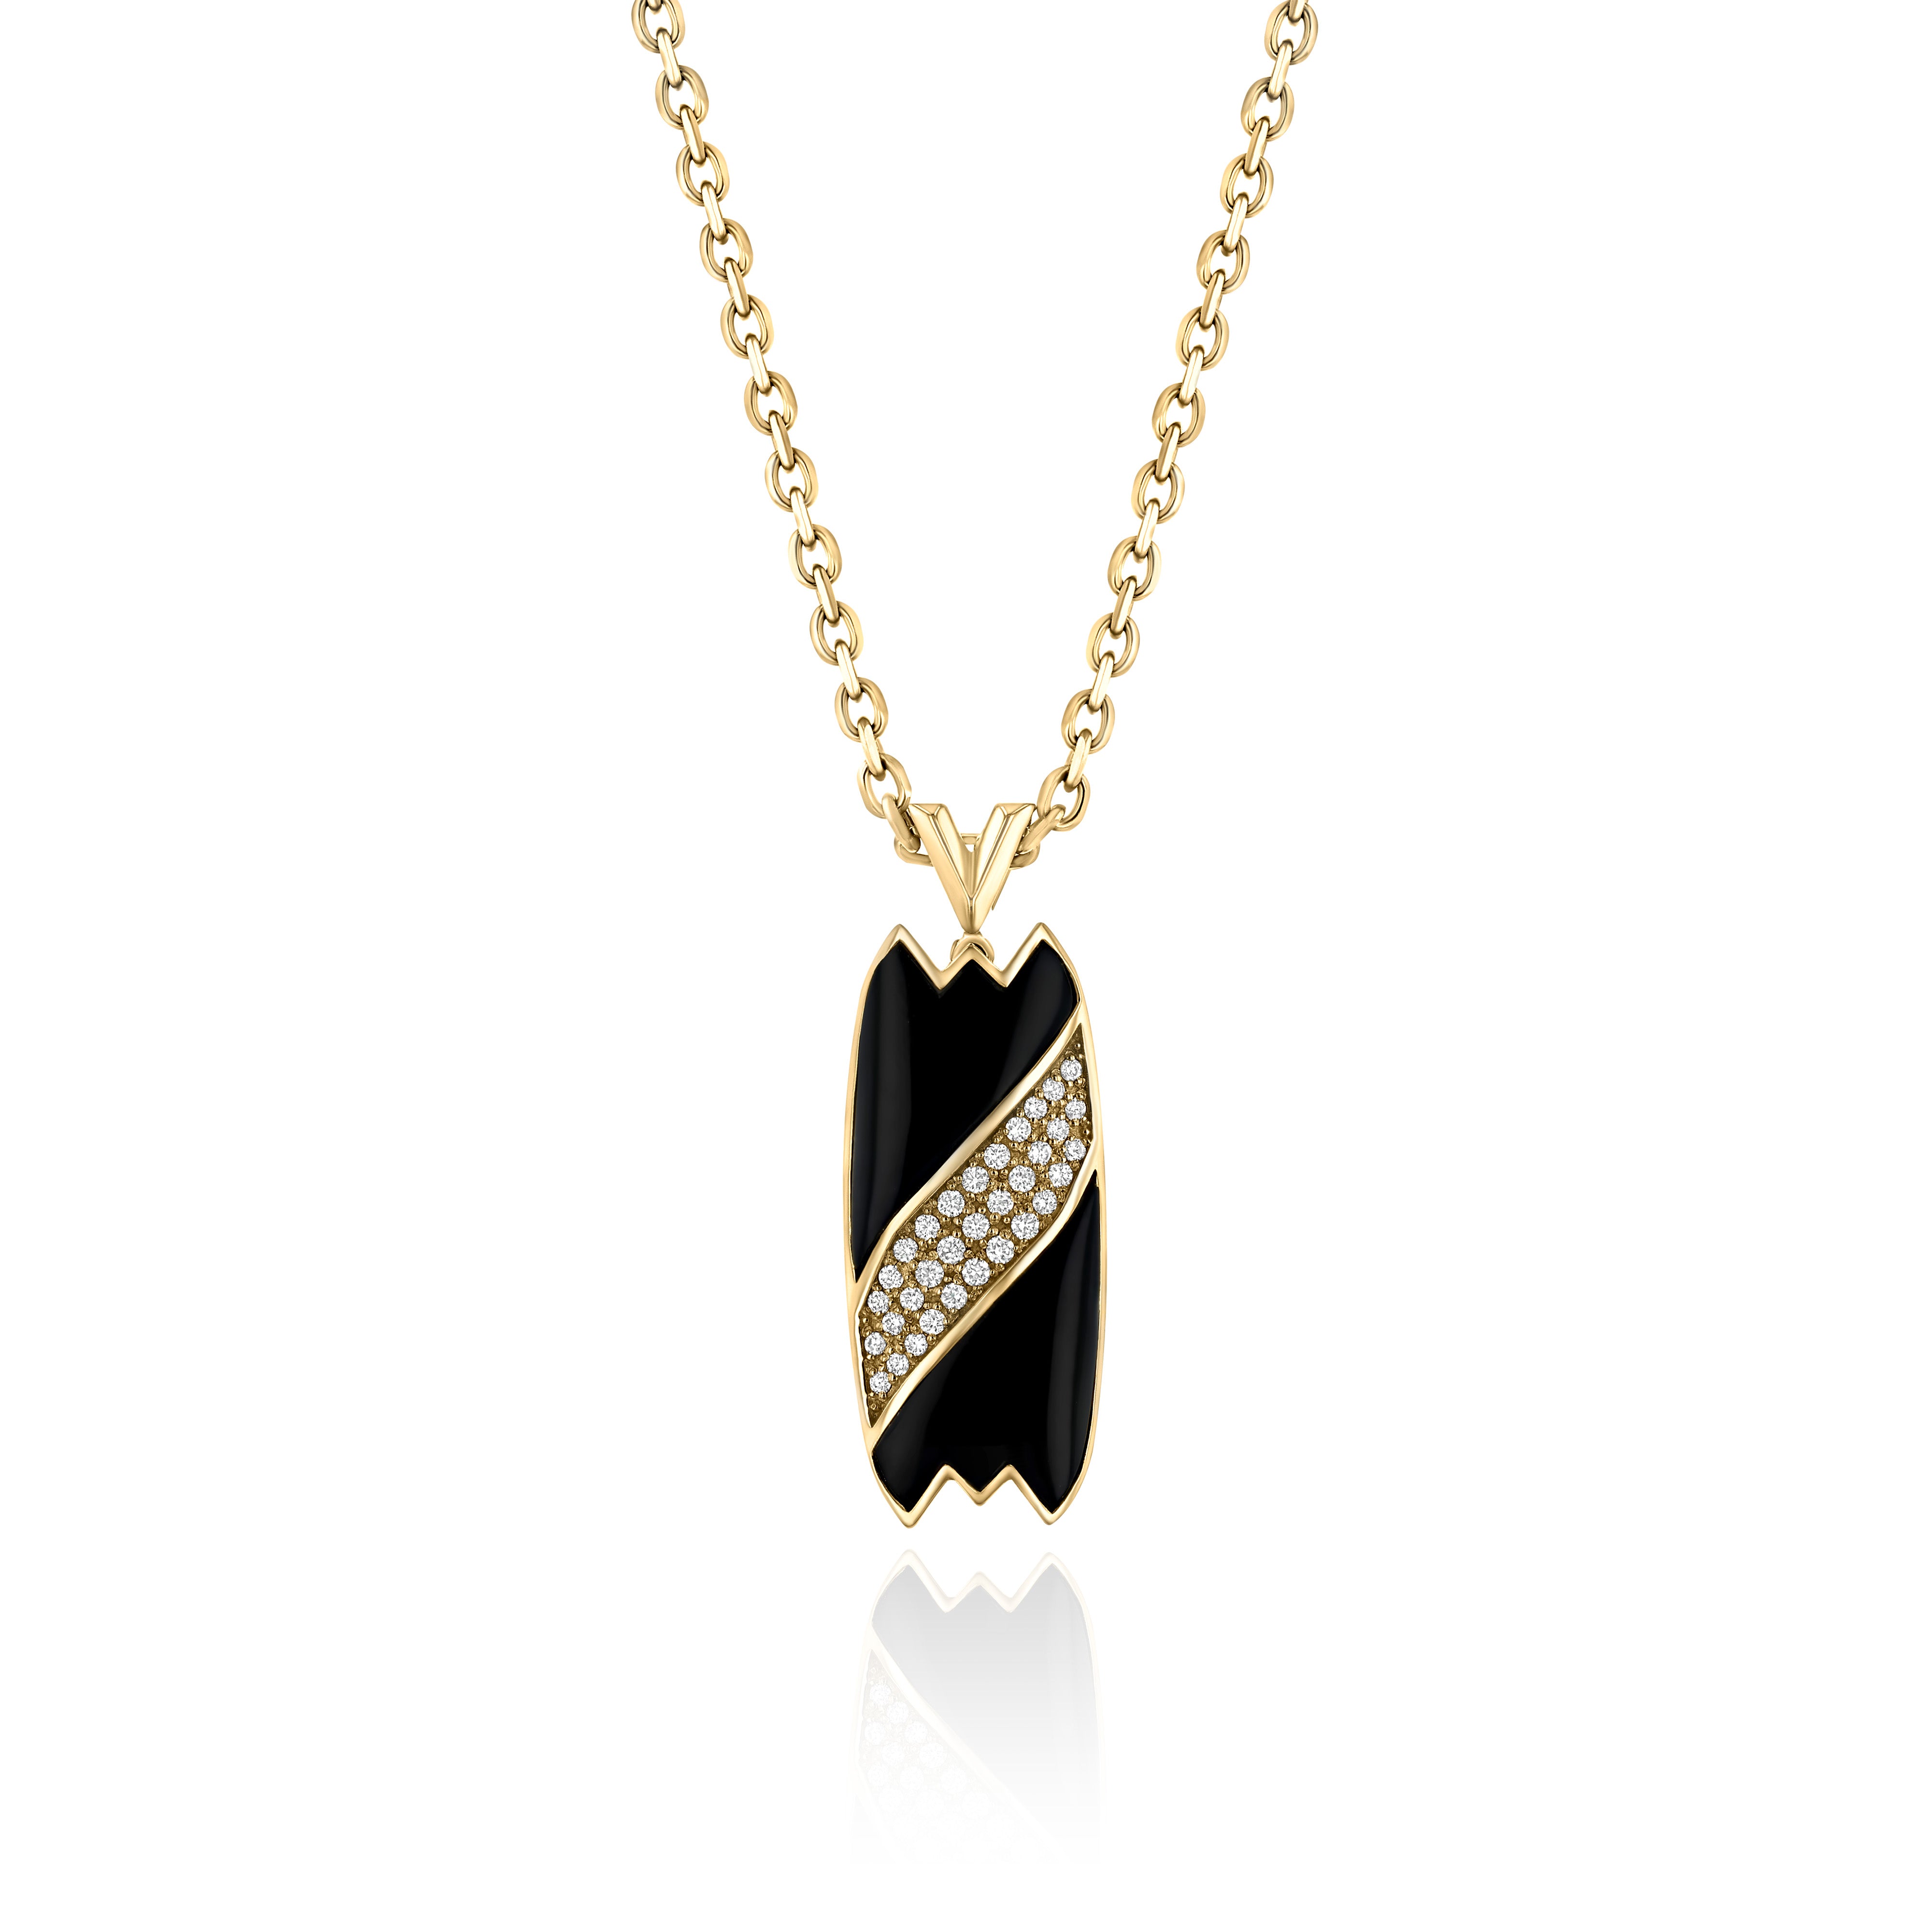 Yellow Gold Necklace with patterned Black Onyx and small round Diamonds, Small